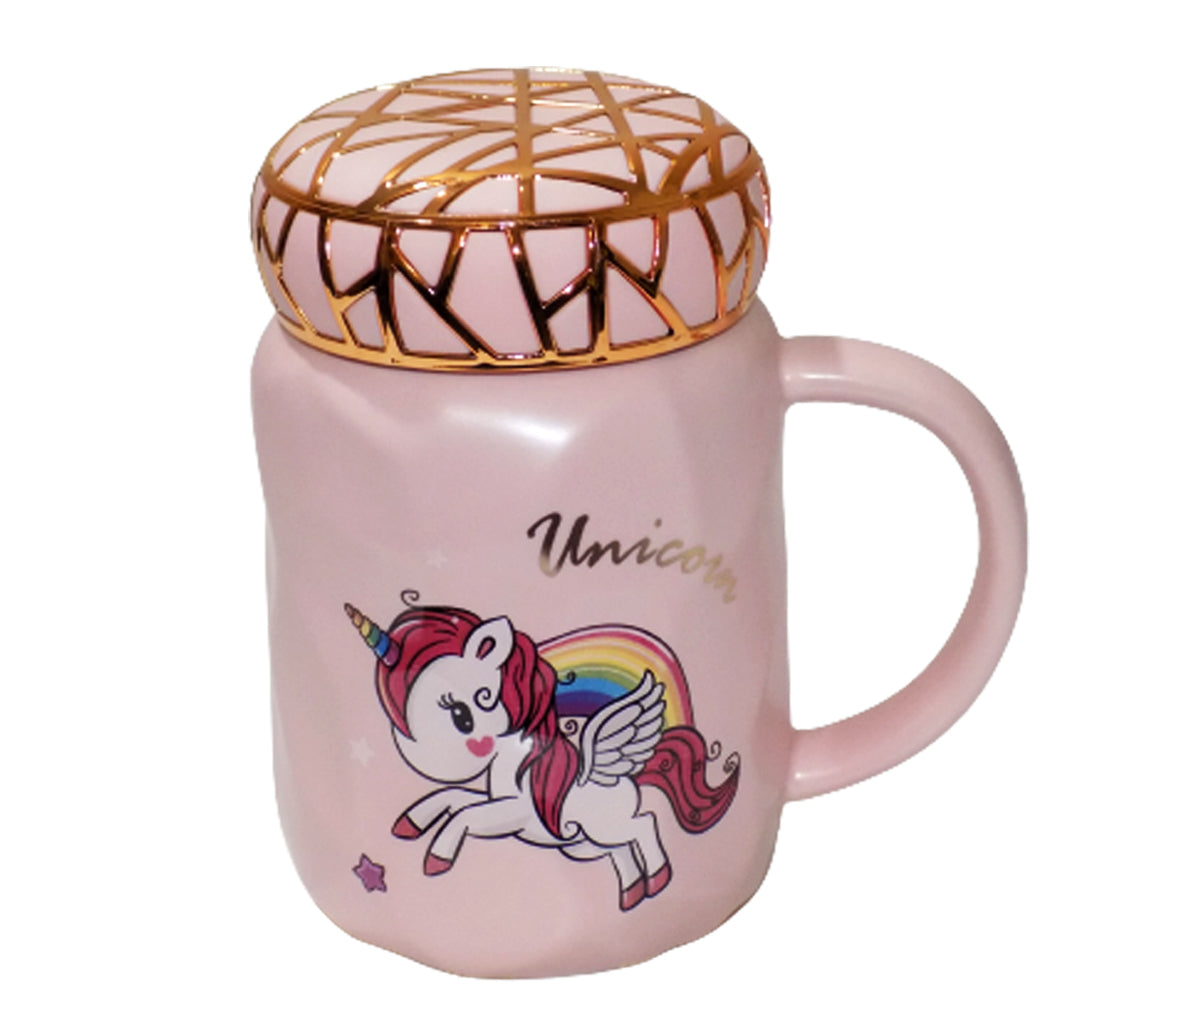 Charming Pink Unicorn Cup with Stunning Textured Lid